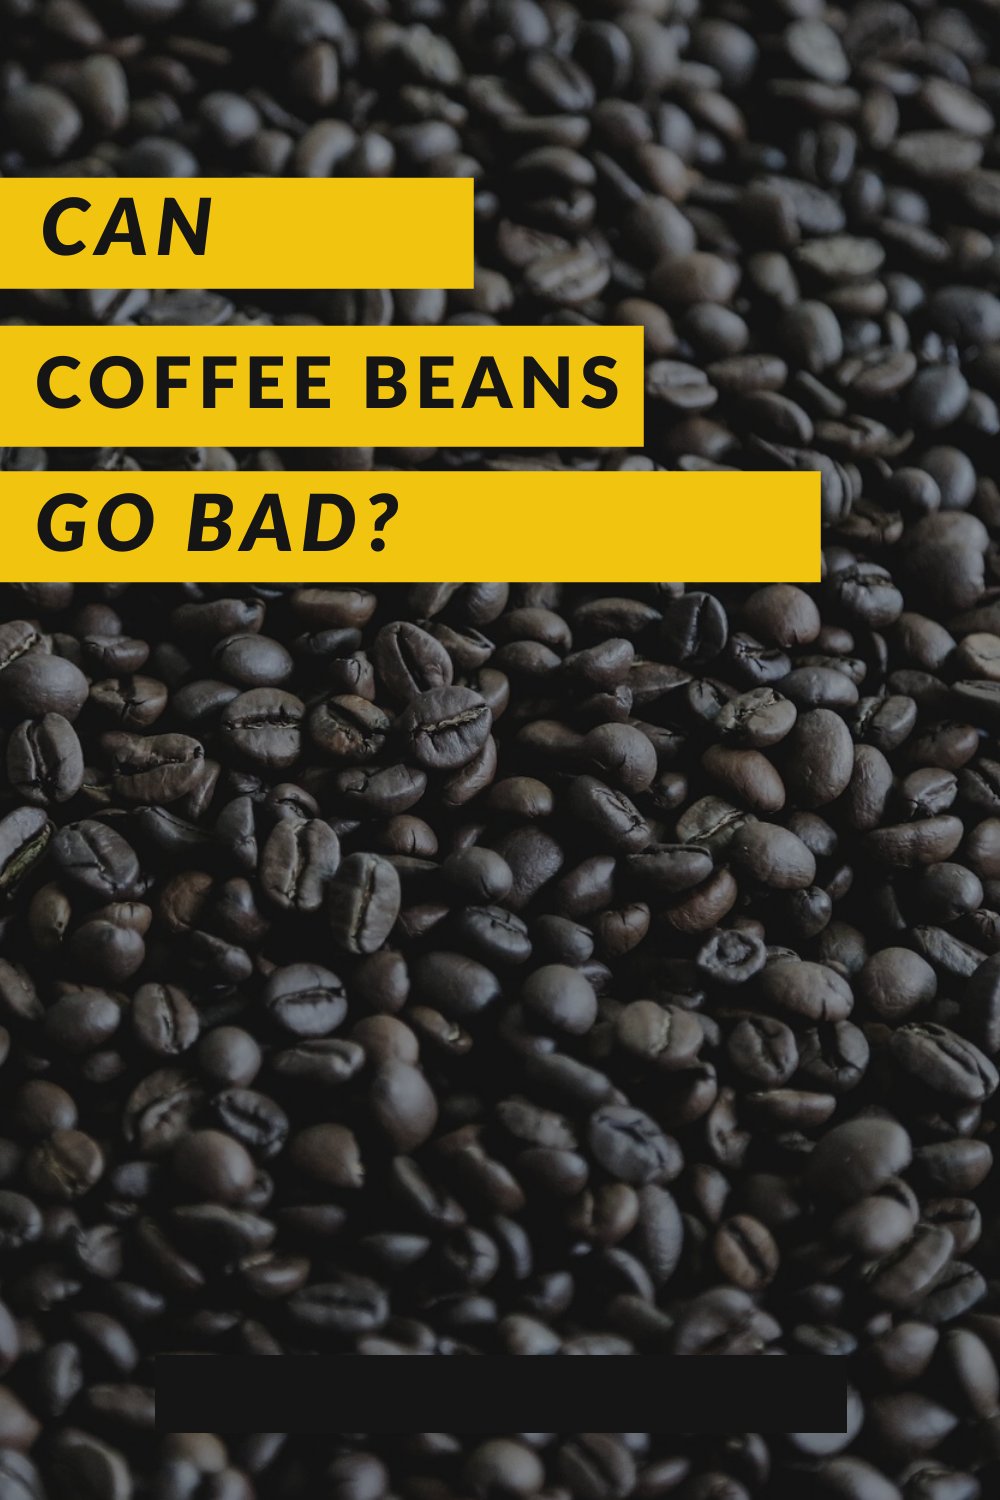 Can Coffee Beans Go Bad?